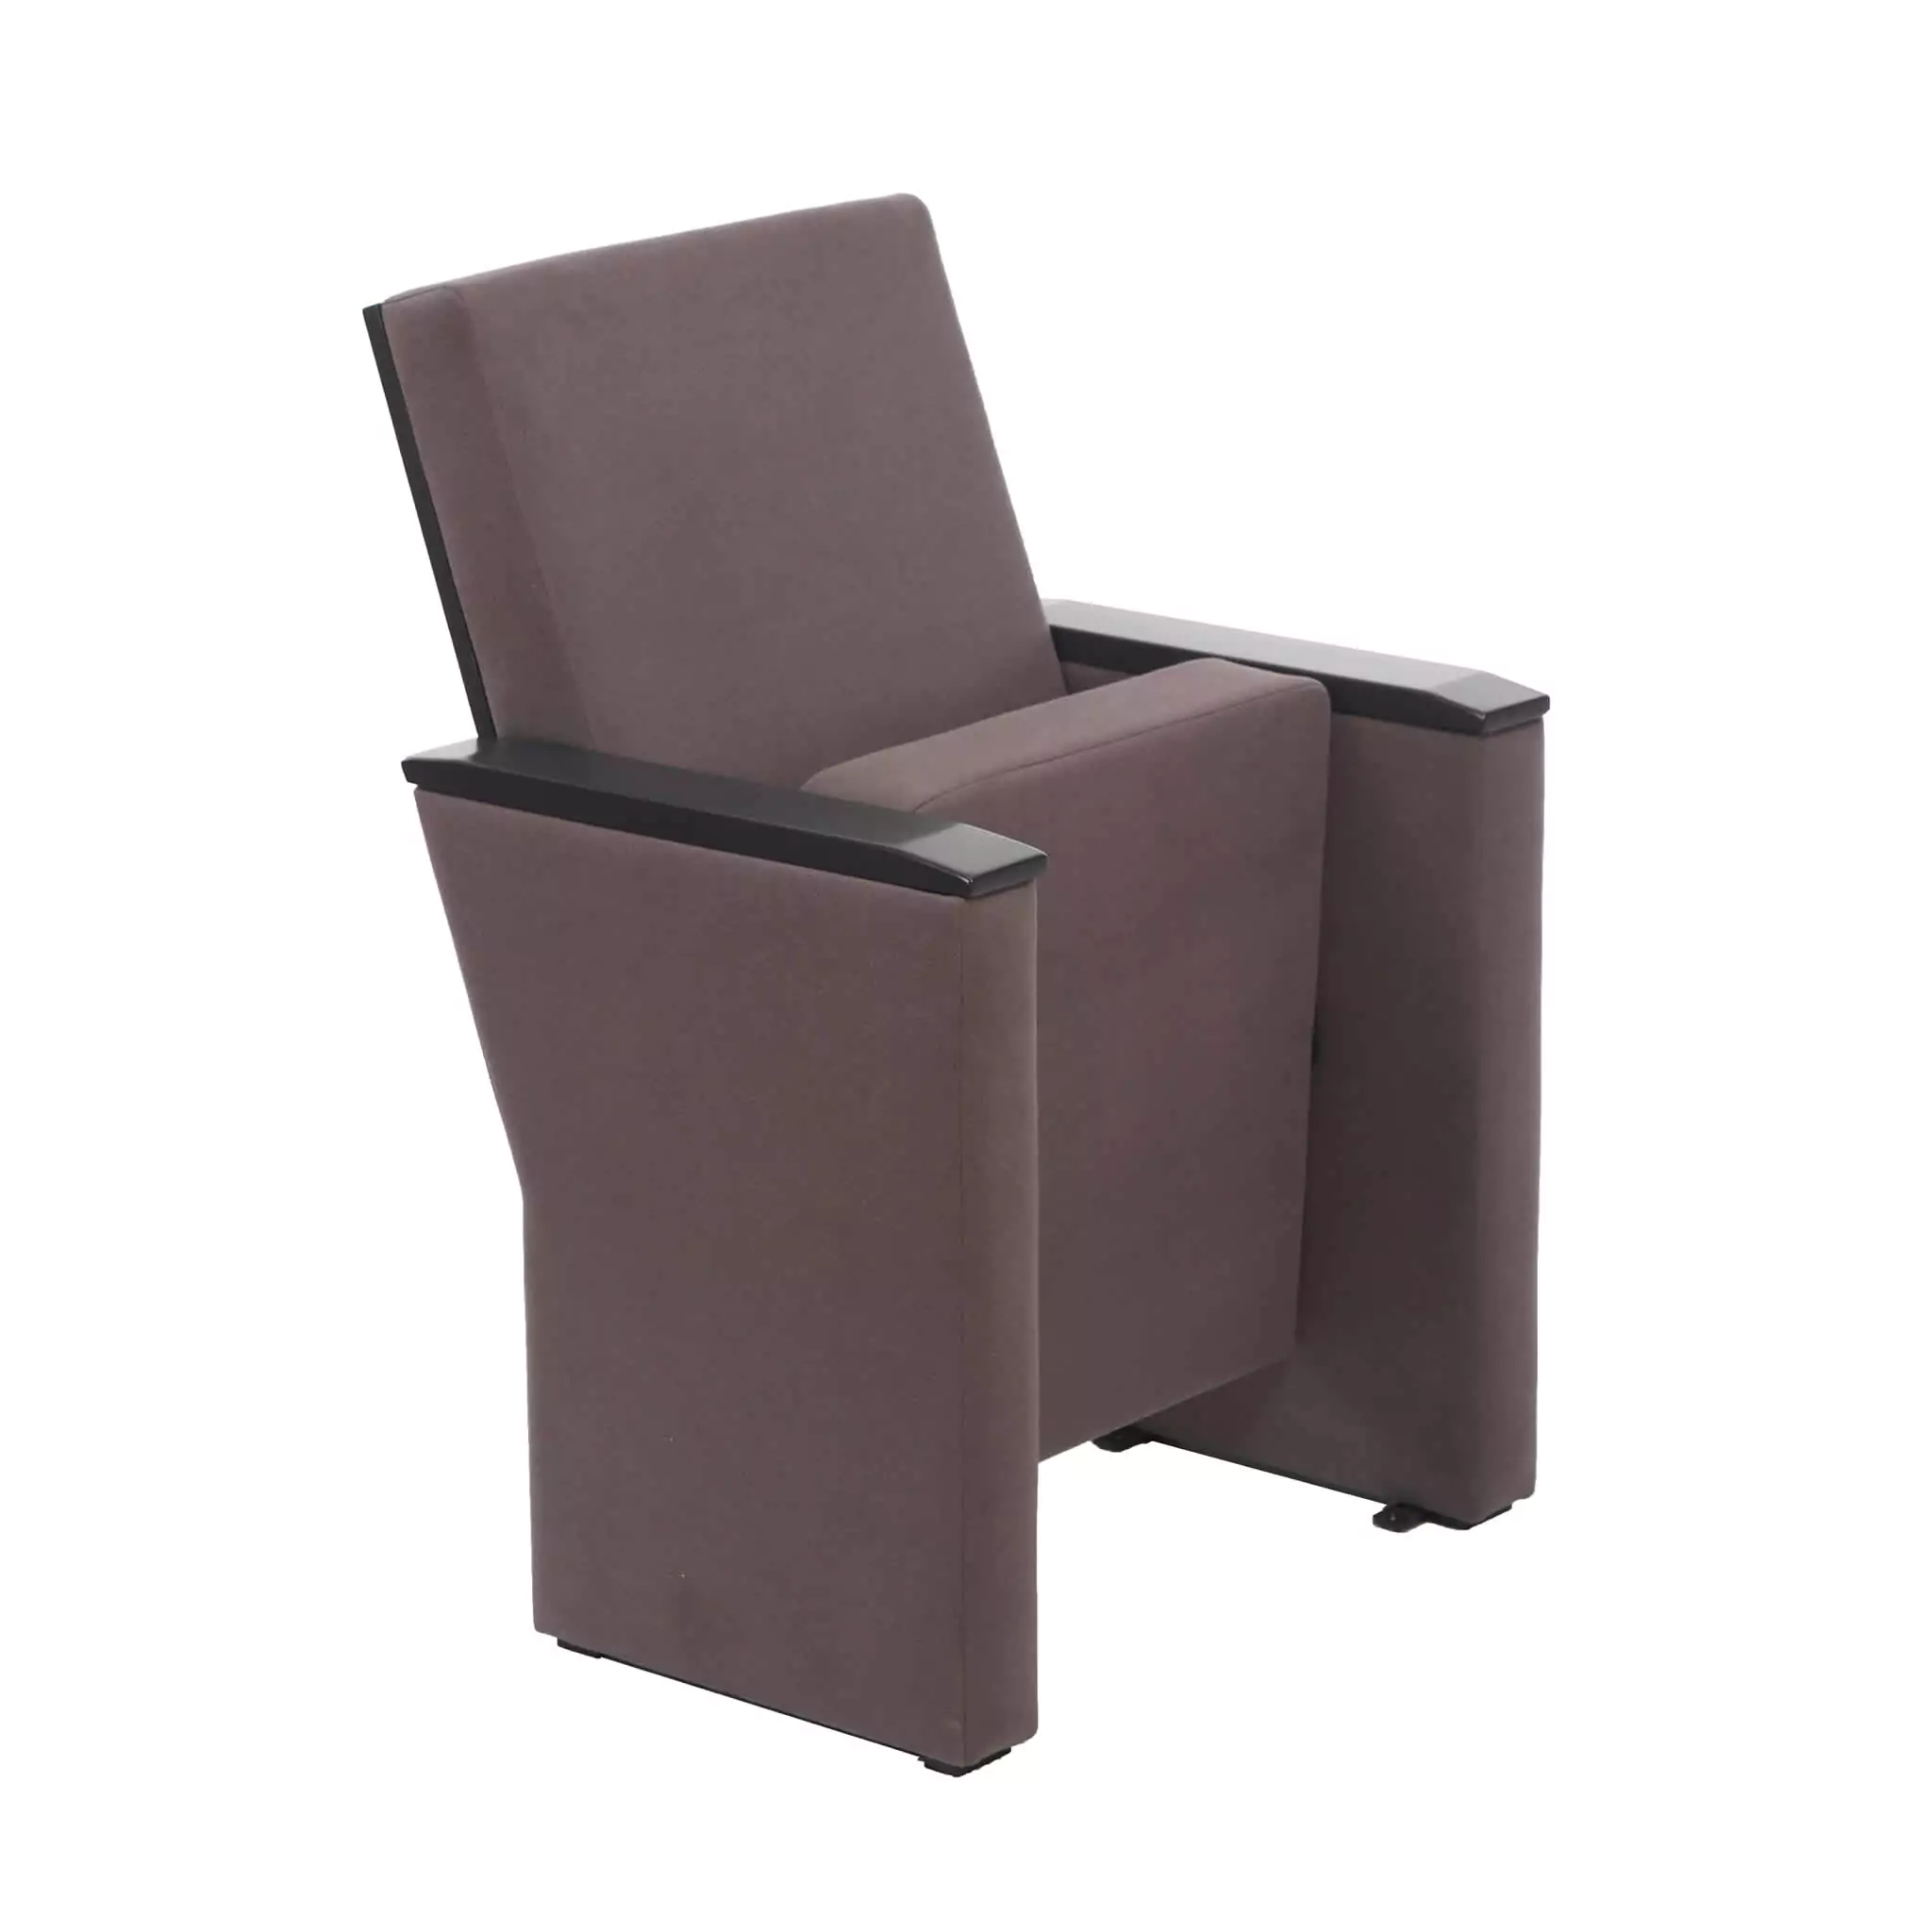 Simko Seating Products Conference Seat Kuvars